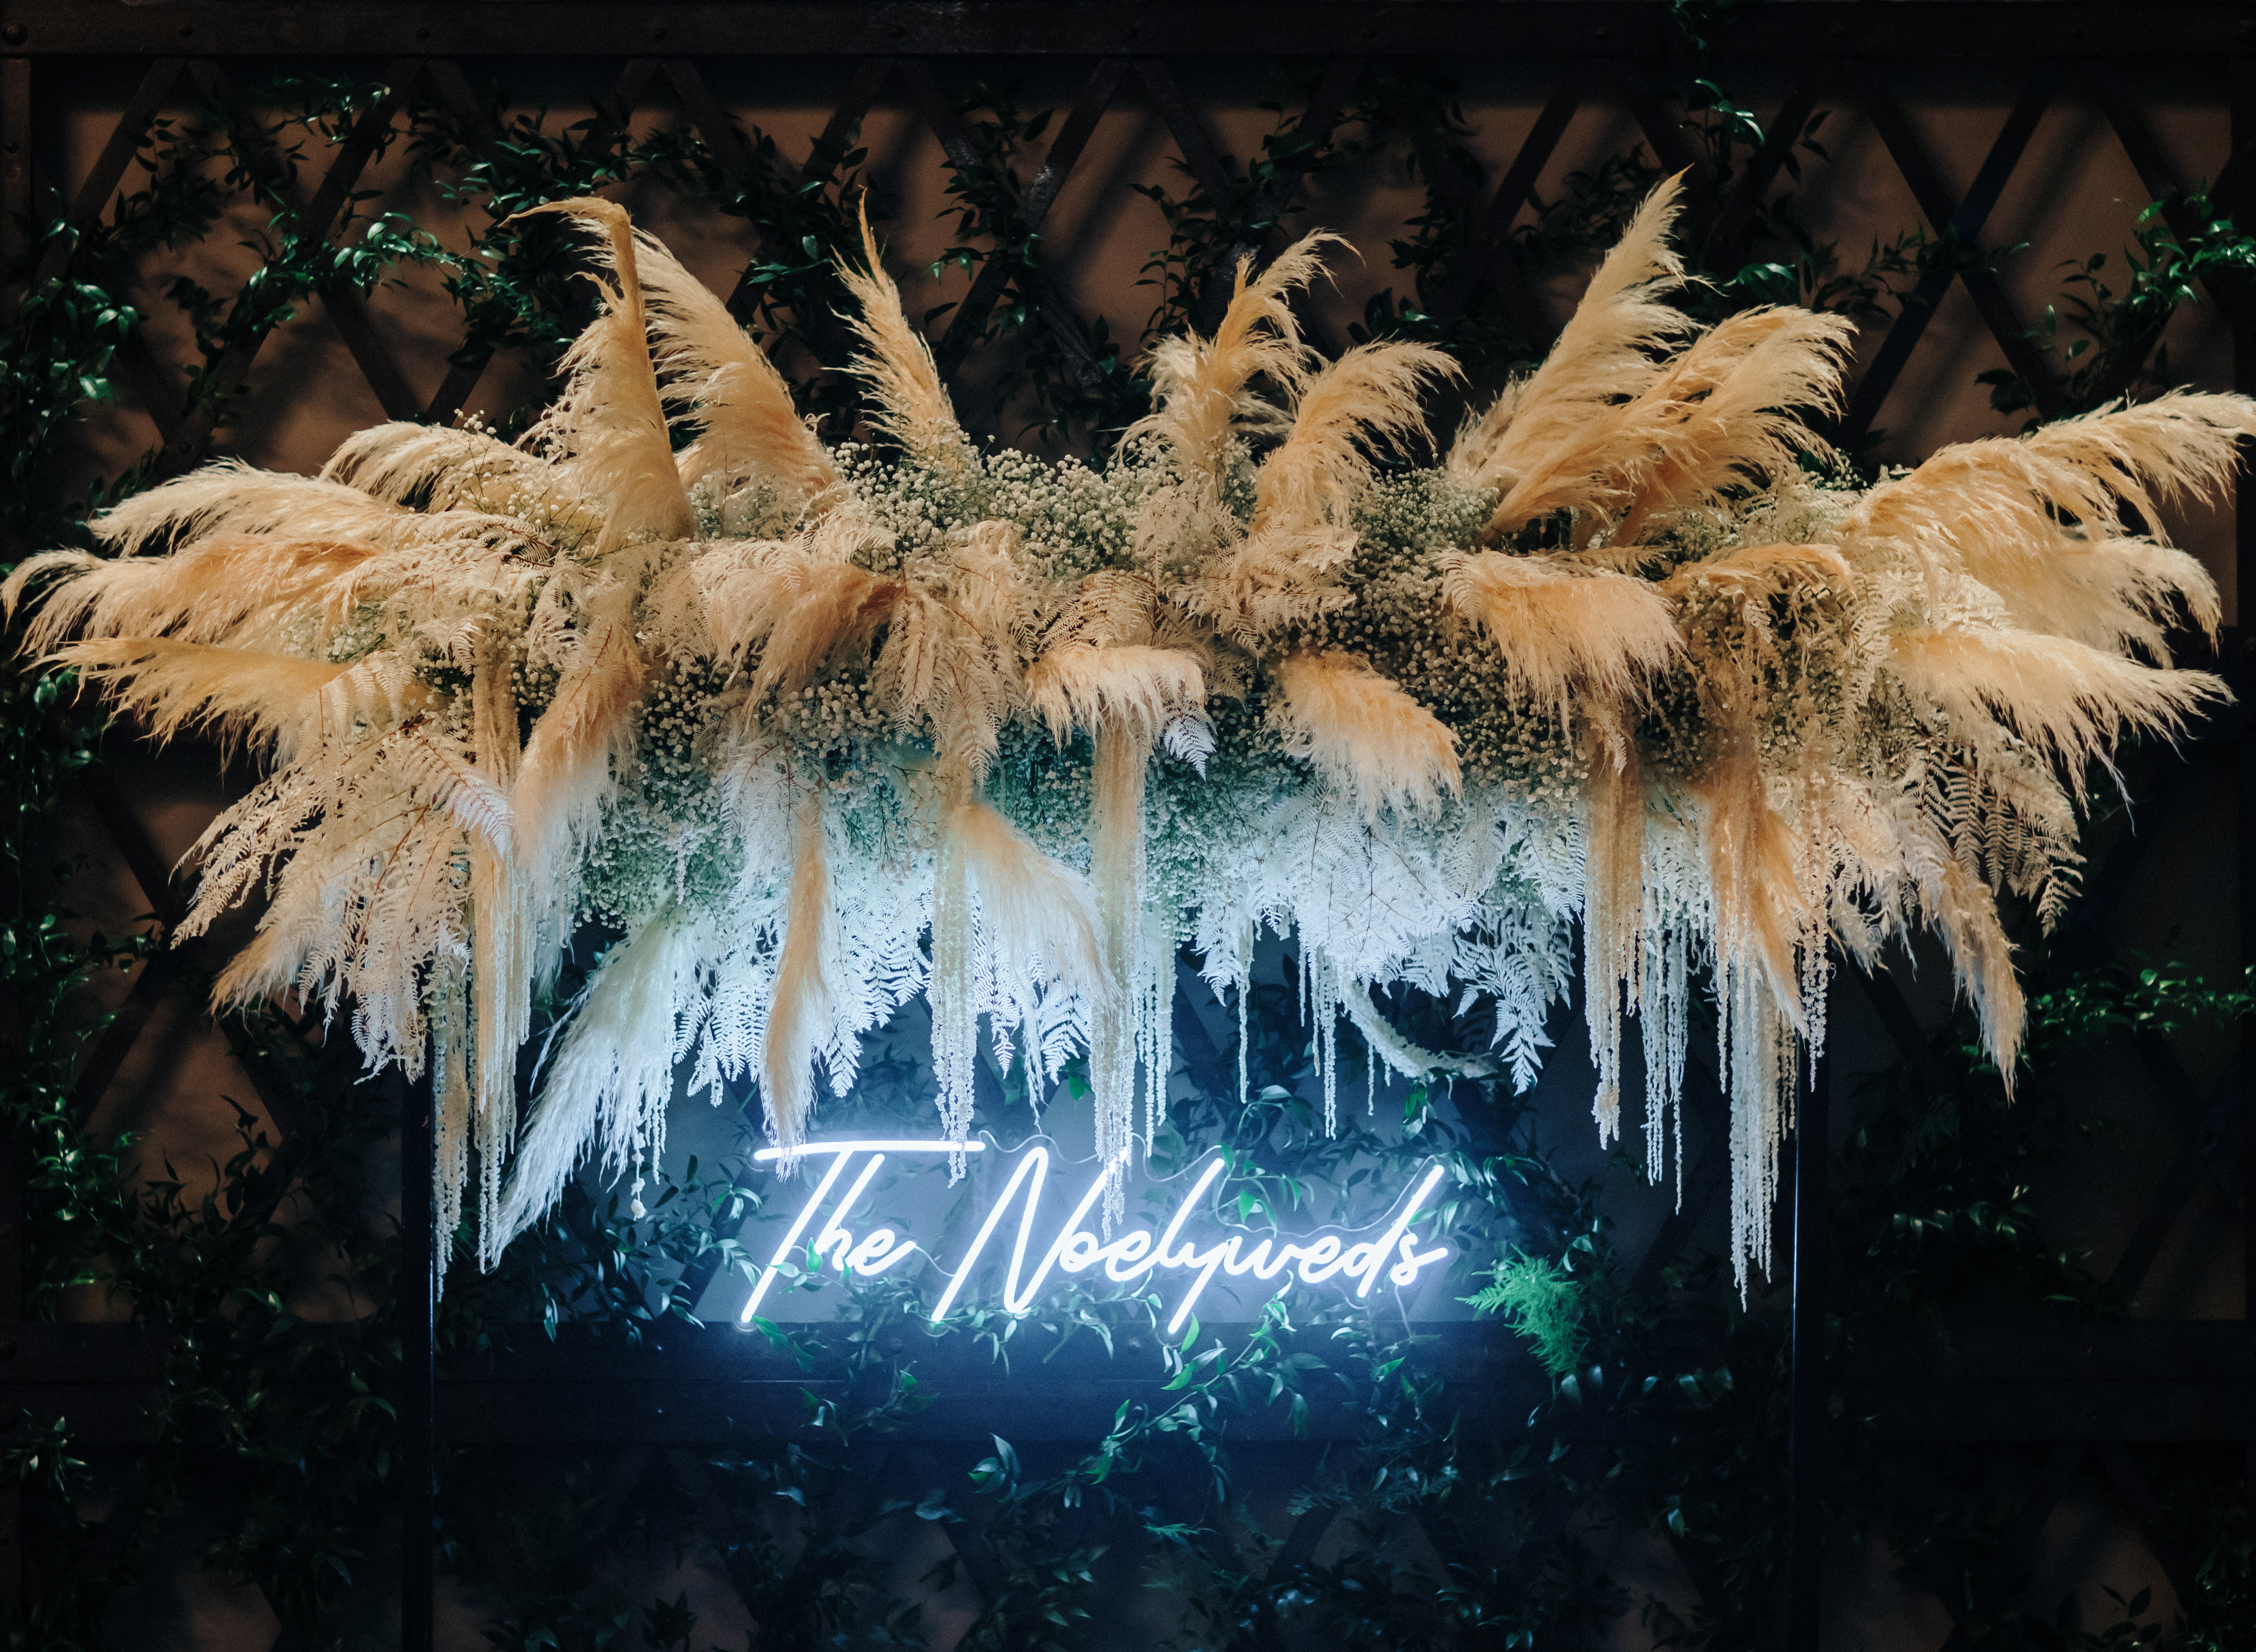 A neon sign that says "The Noelyweds" is set up under a floral installation full of baby's breath and pampas grass.